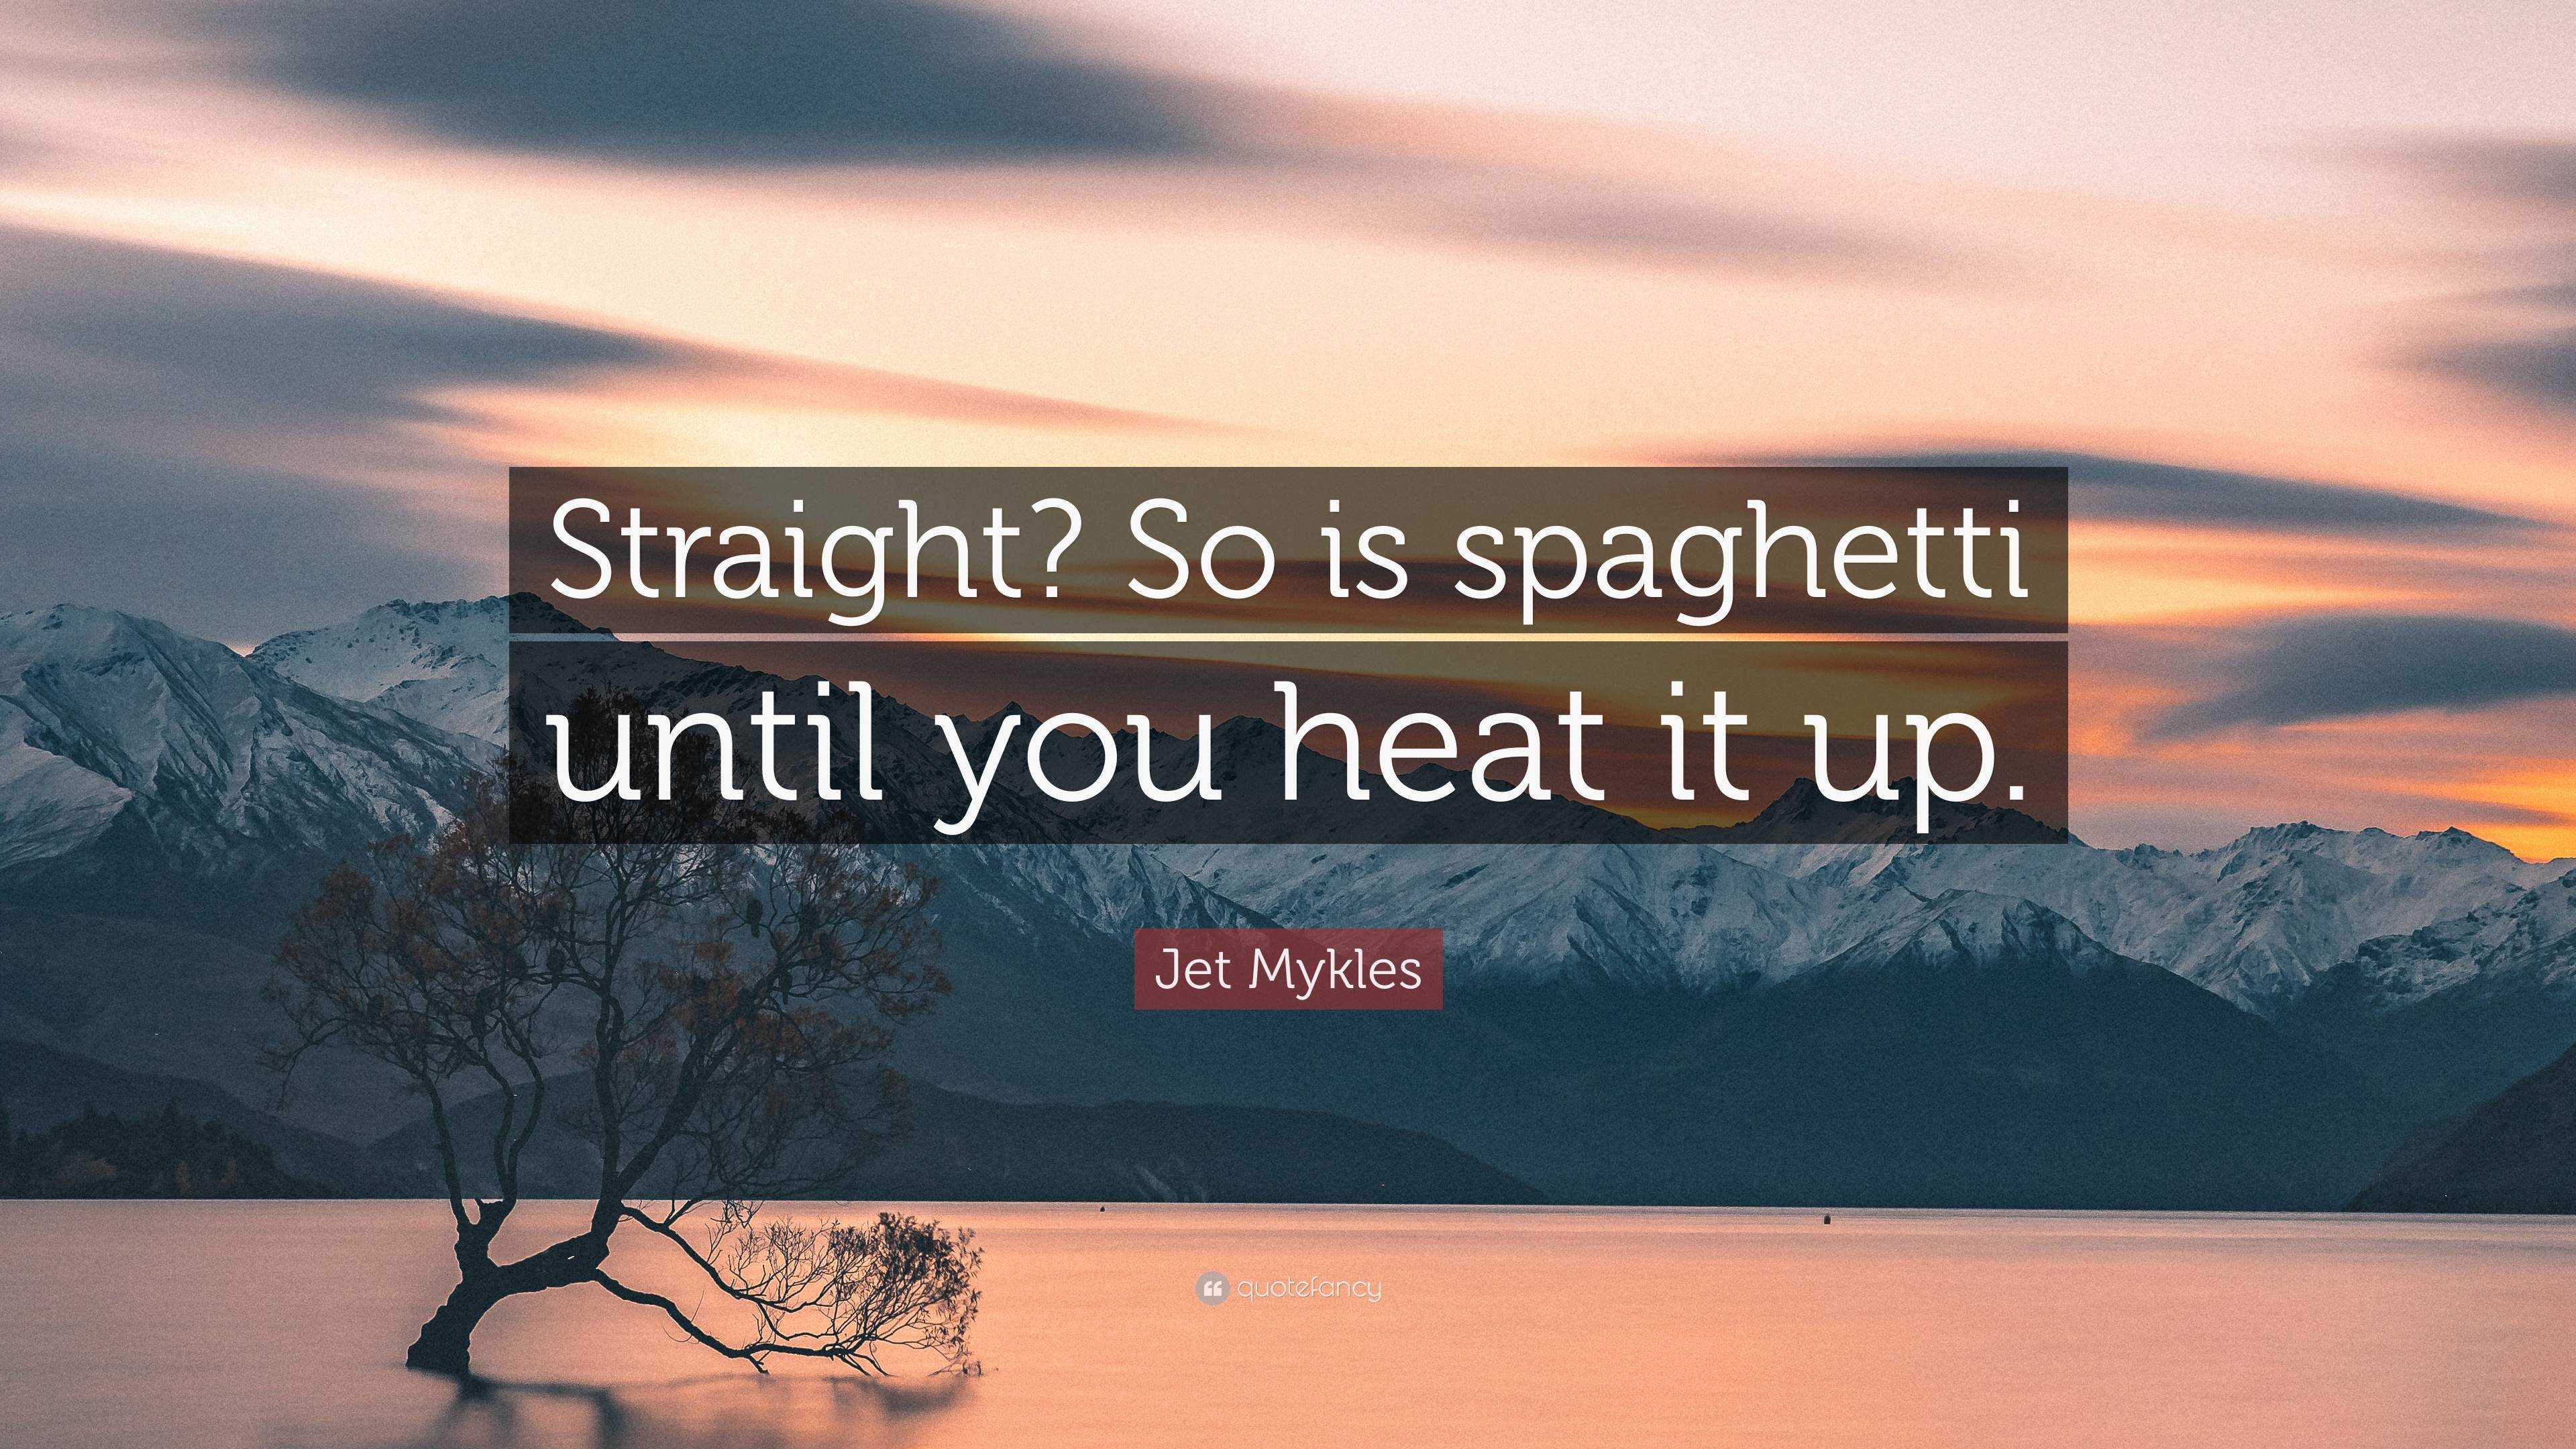 Jet Mykles Quote: “Straight? So is spaghetti until you heat it up.”